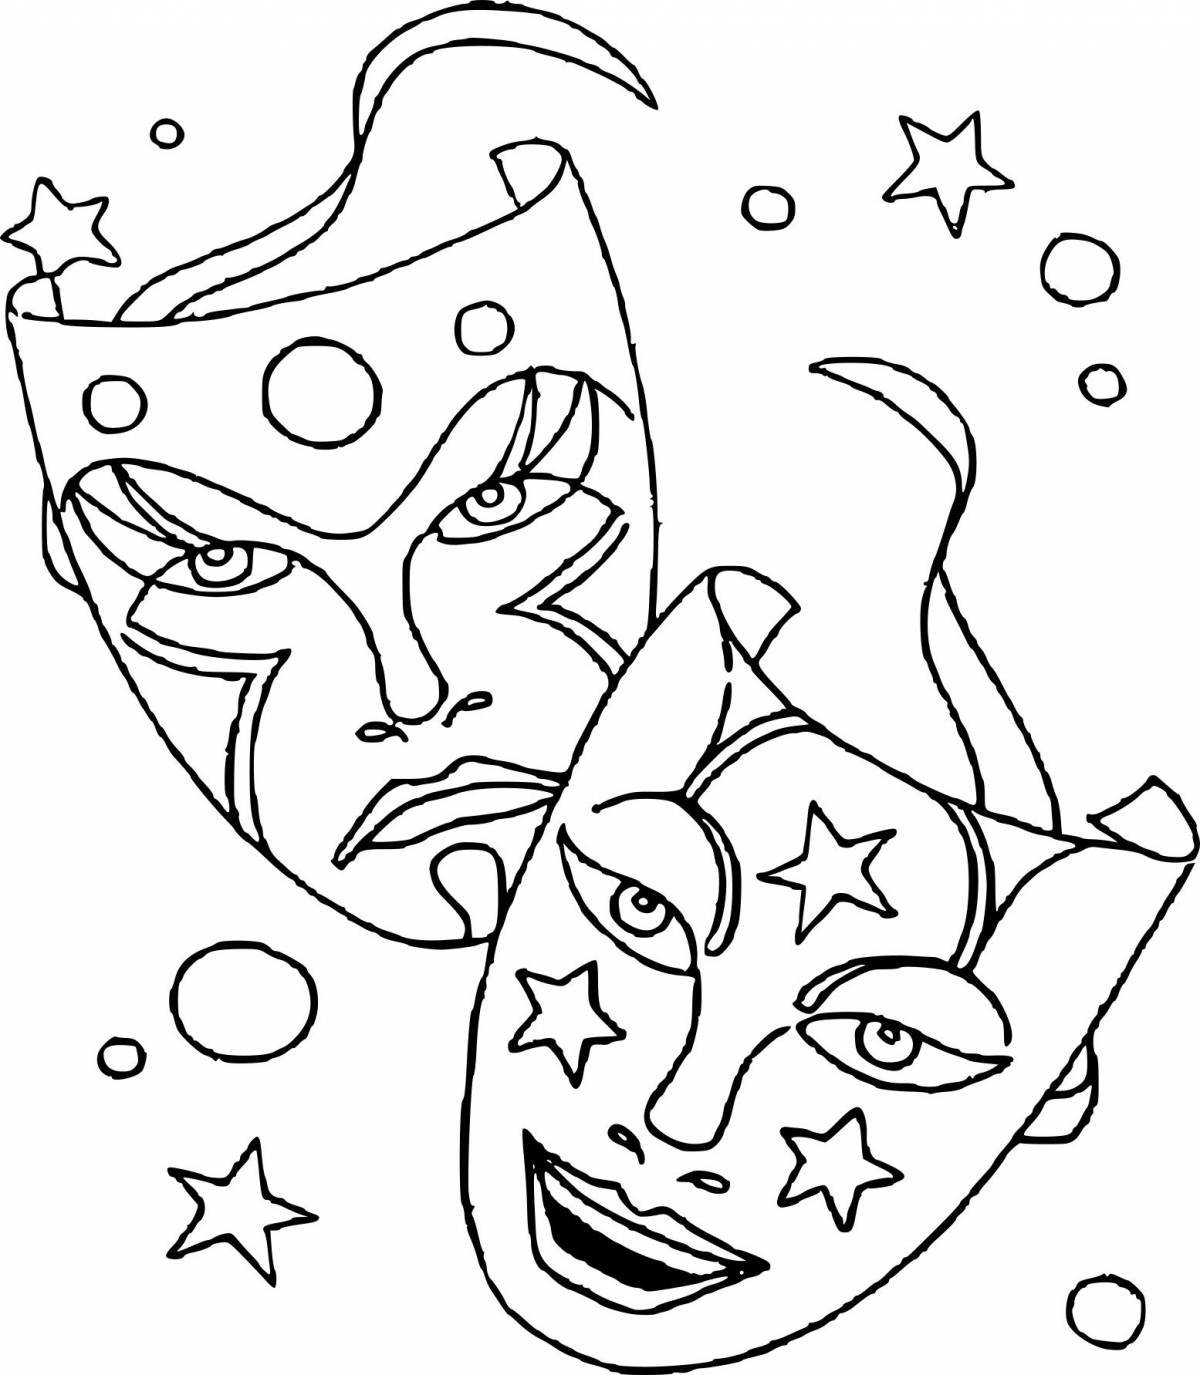 Glowing theater coloring page